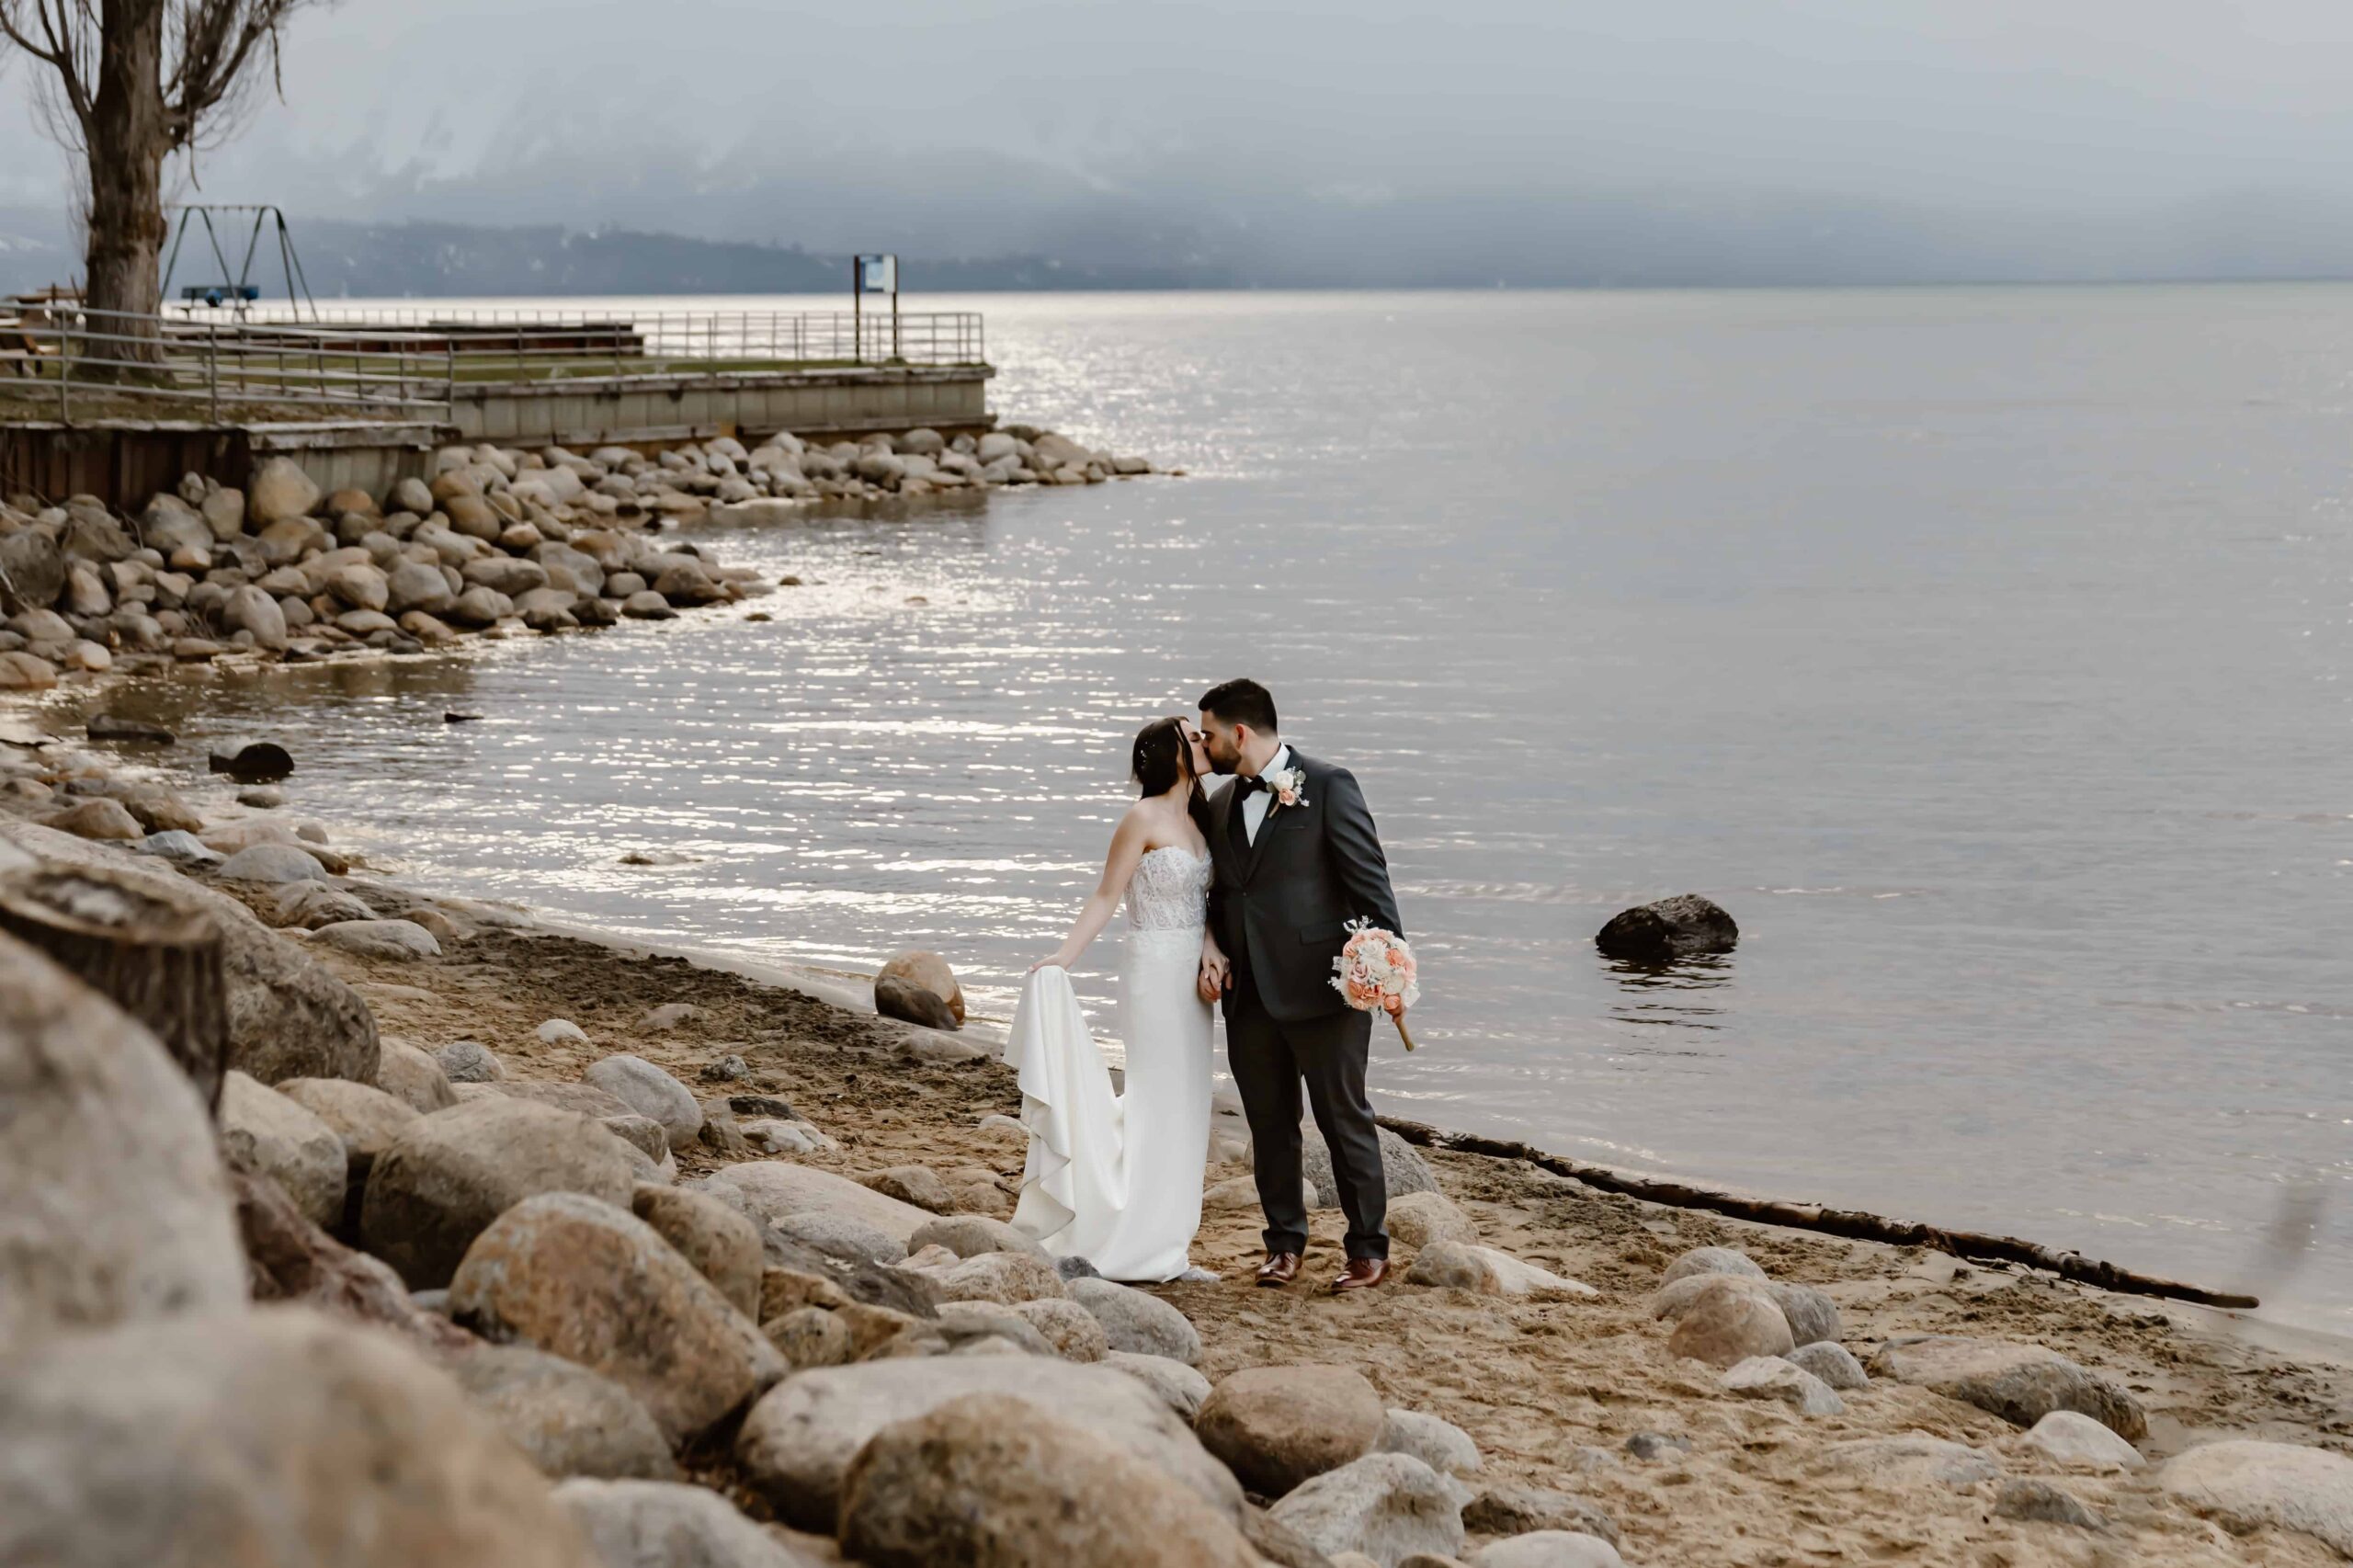 A bride and groom kissing on the beach by the water of Lake Tahoe for their wedding day